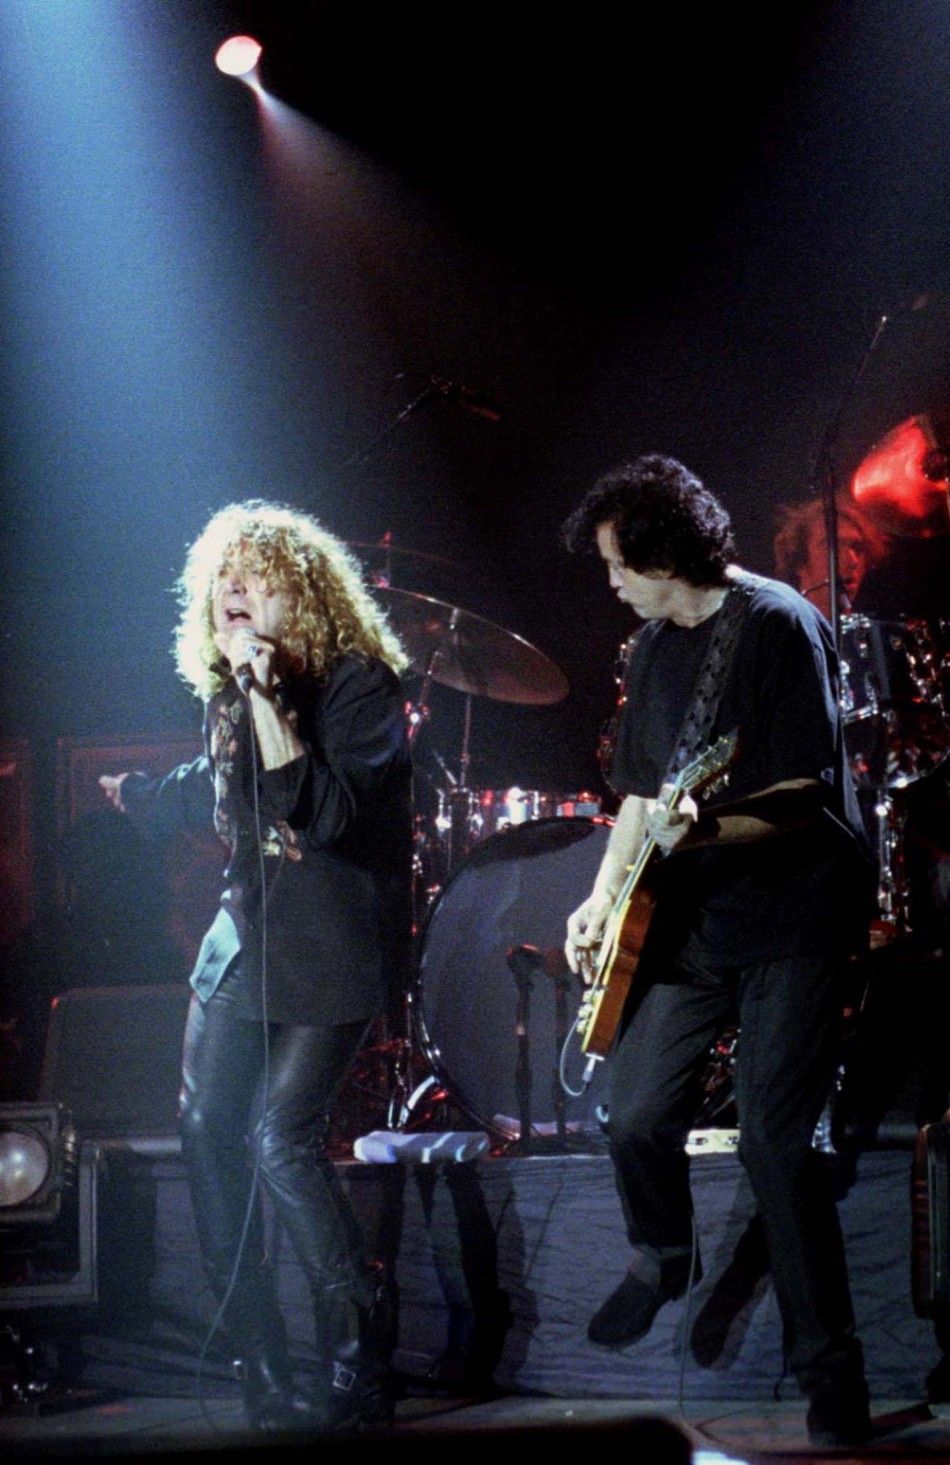 Led Zep jammed with Pearl Jam on reported rip-off